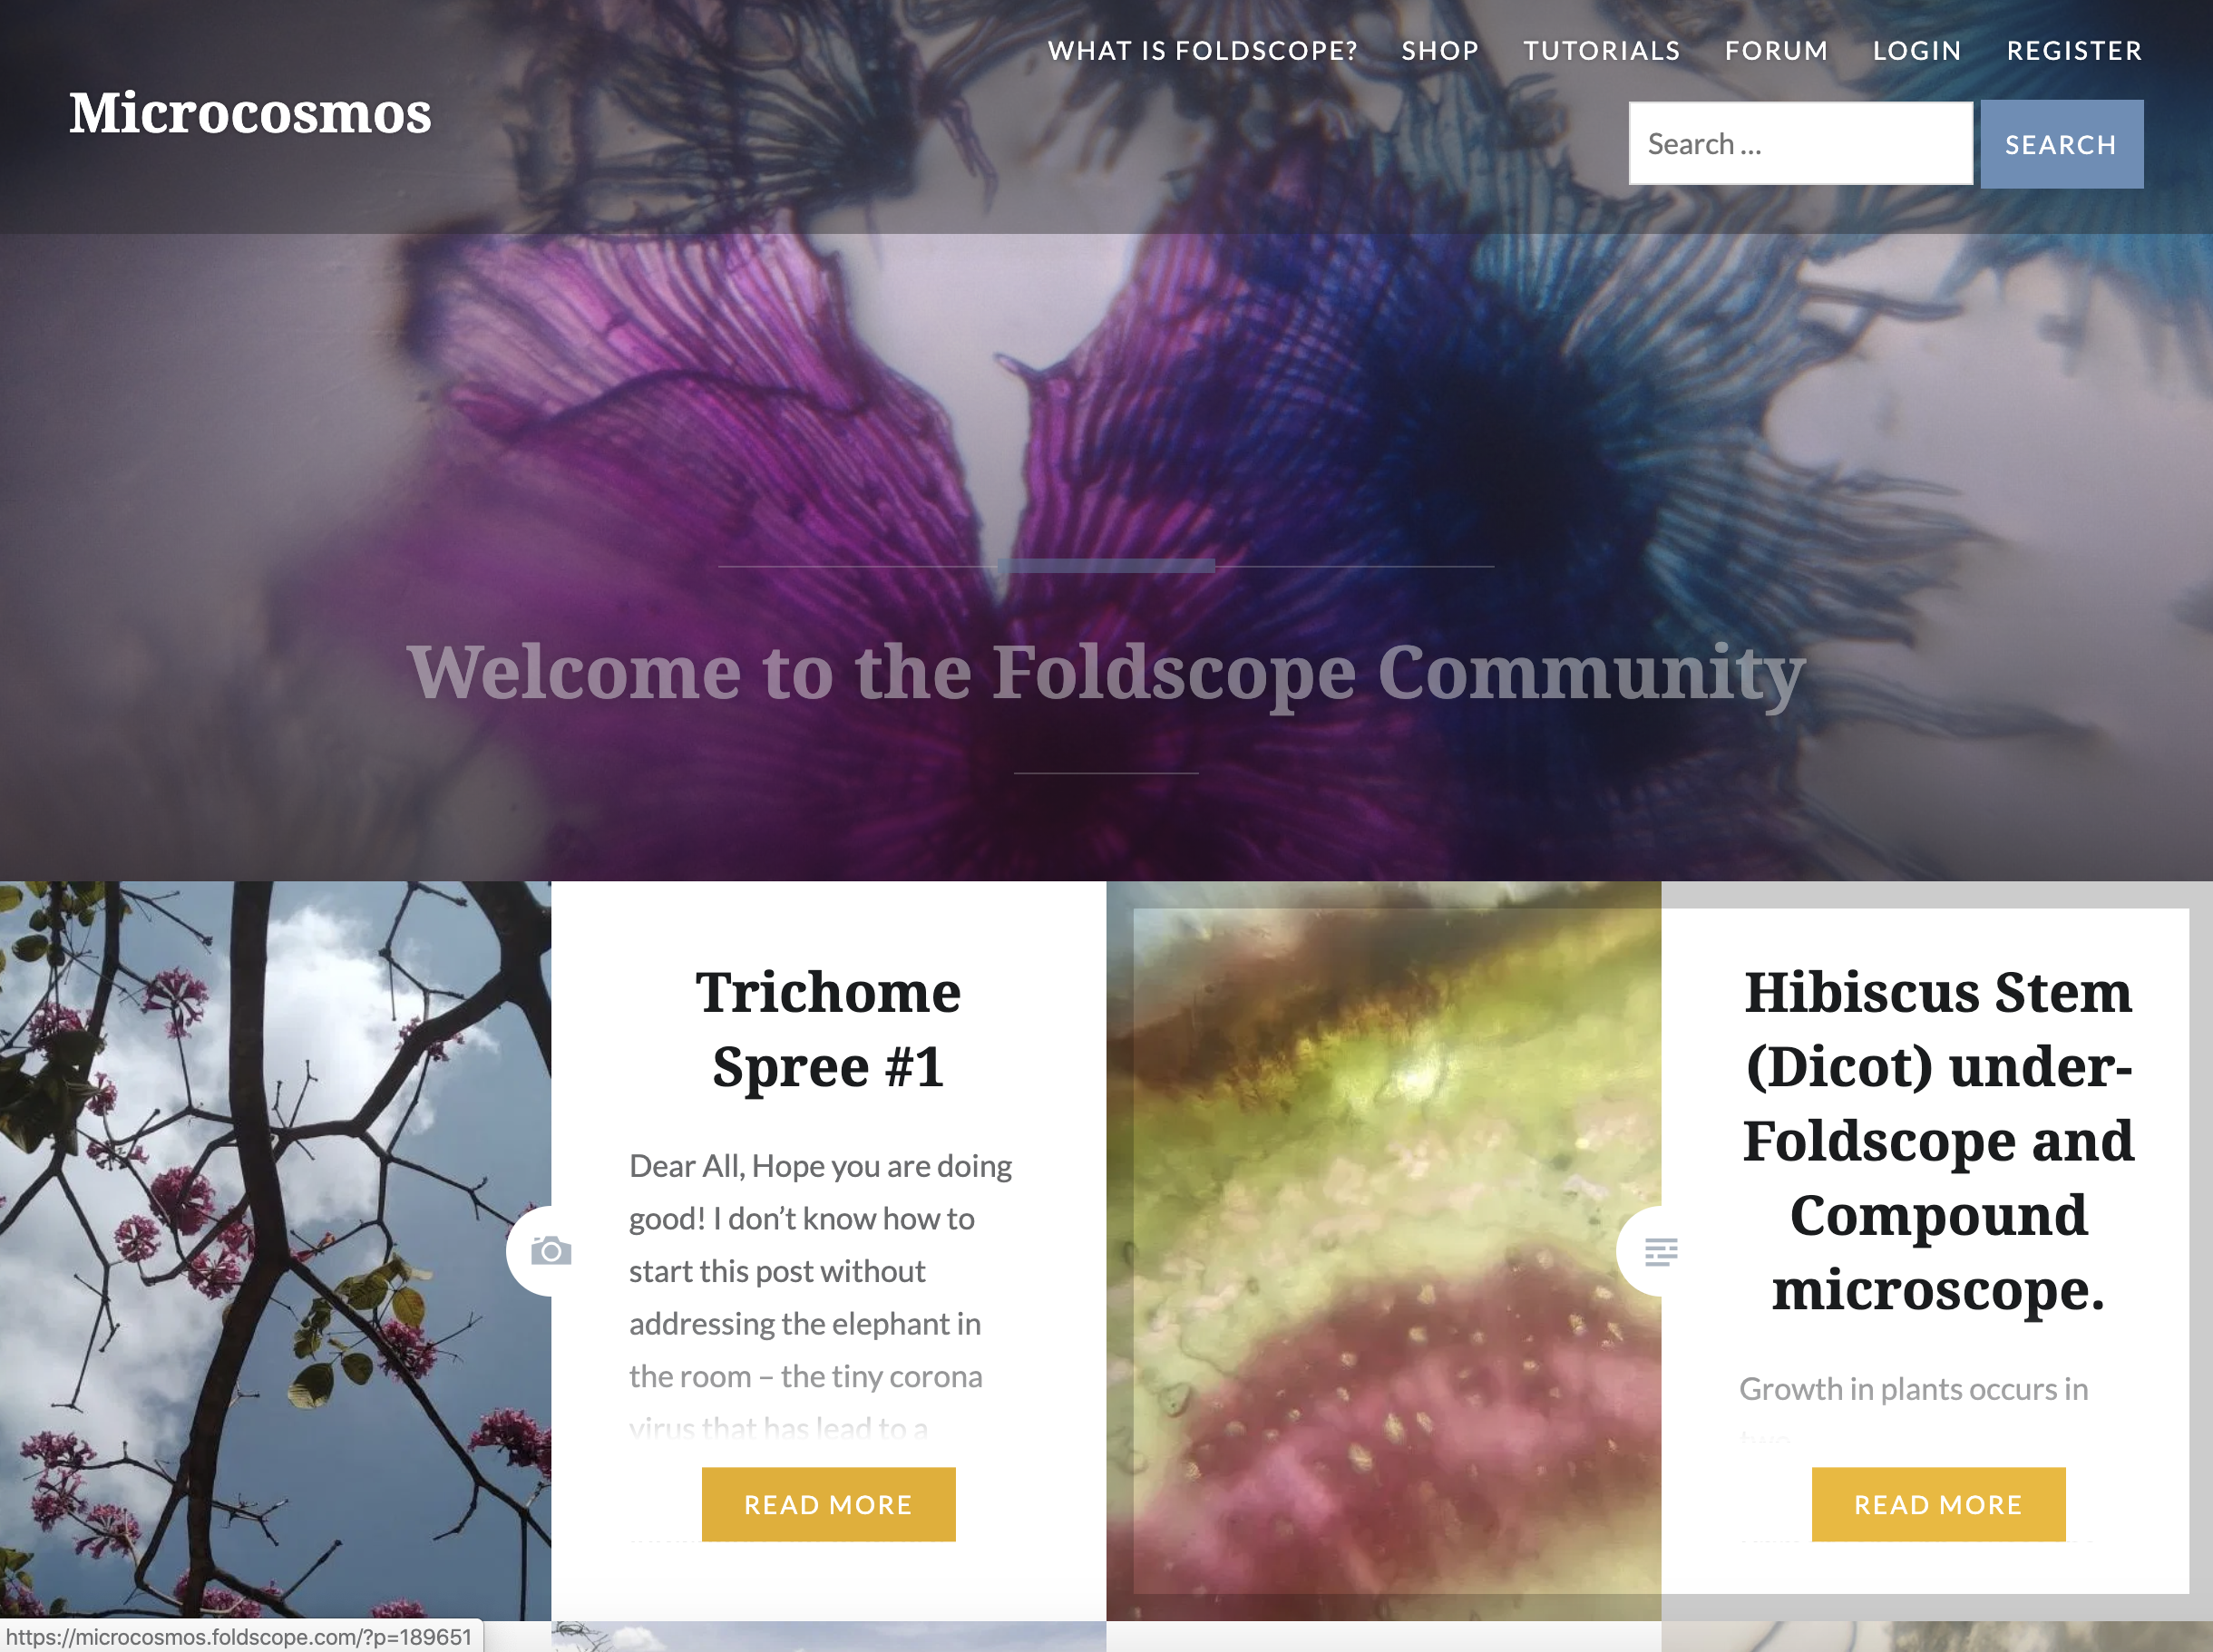 Front page of the microcosmos website.